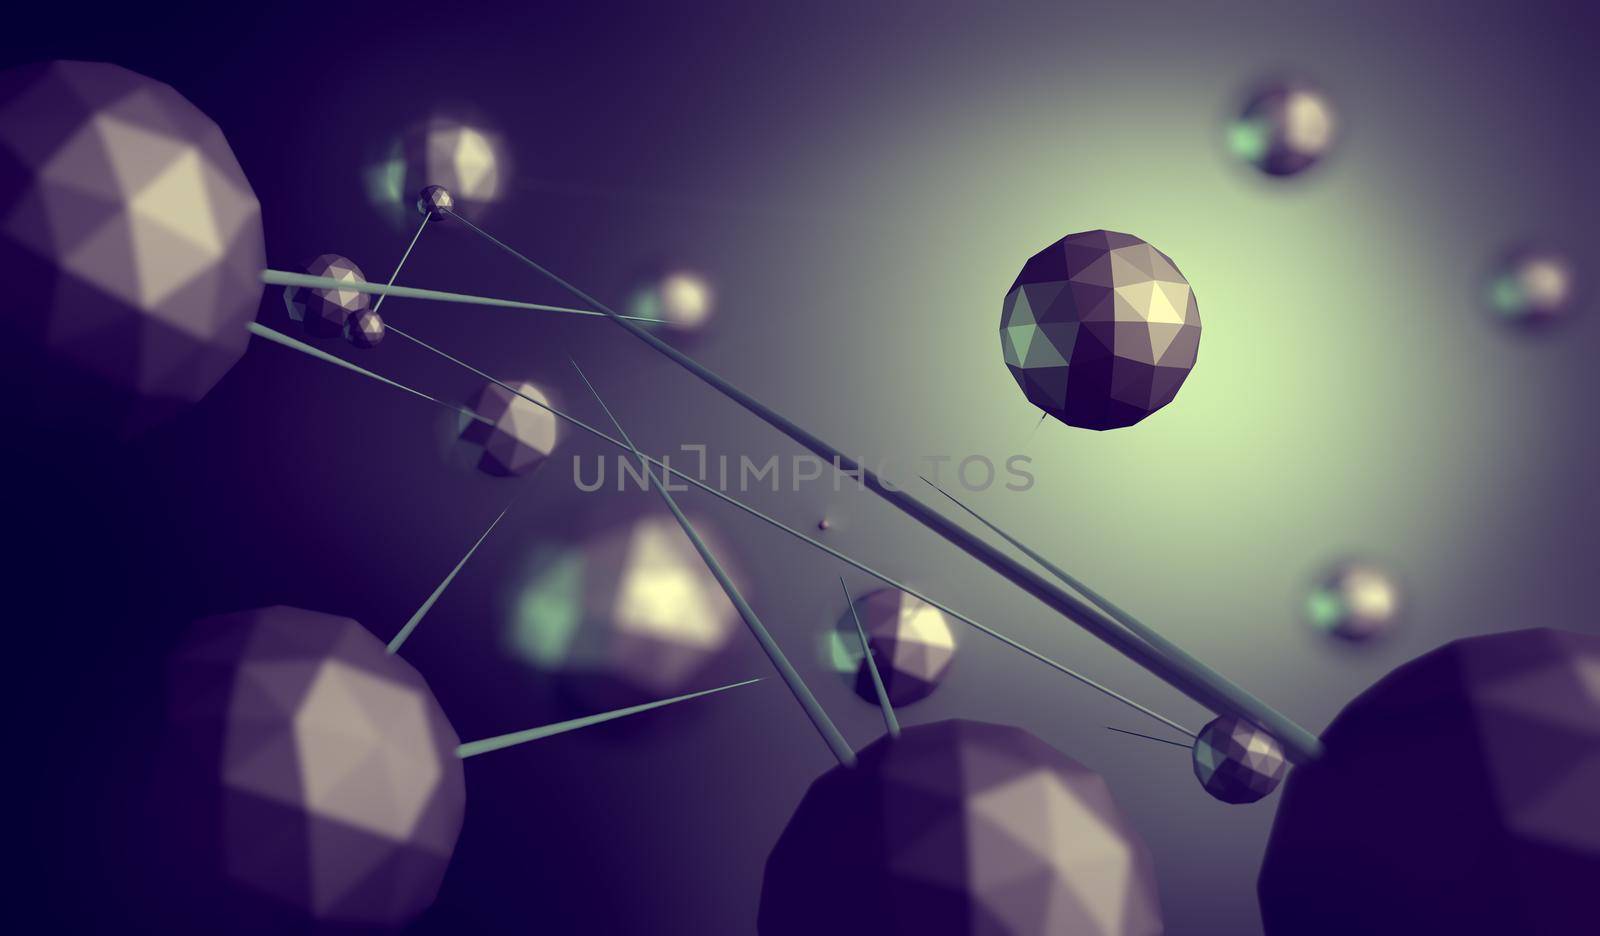 Abstract background of internet and technology.